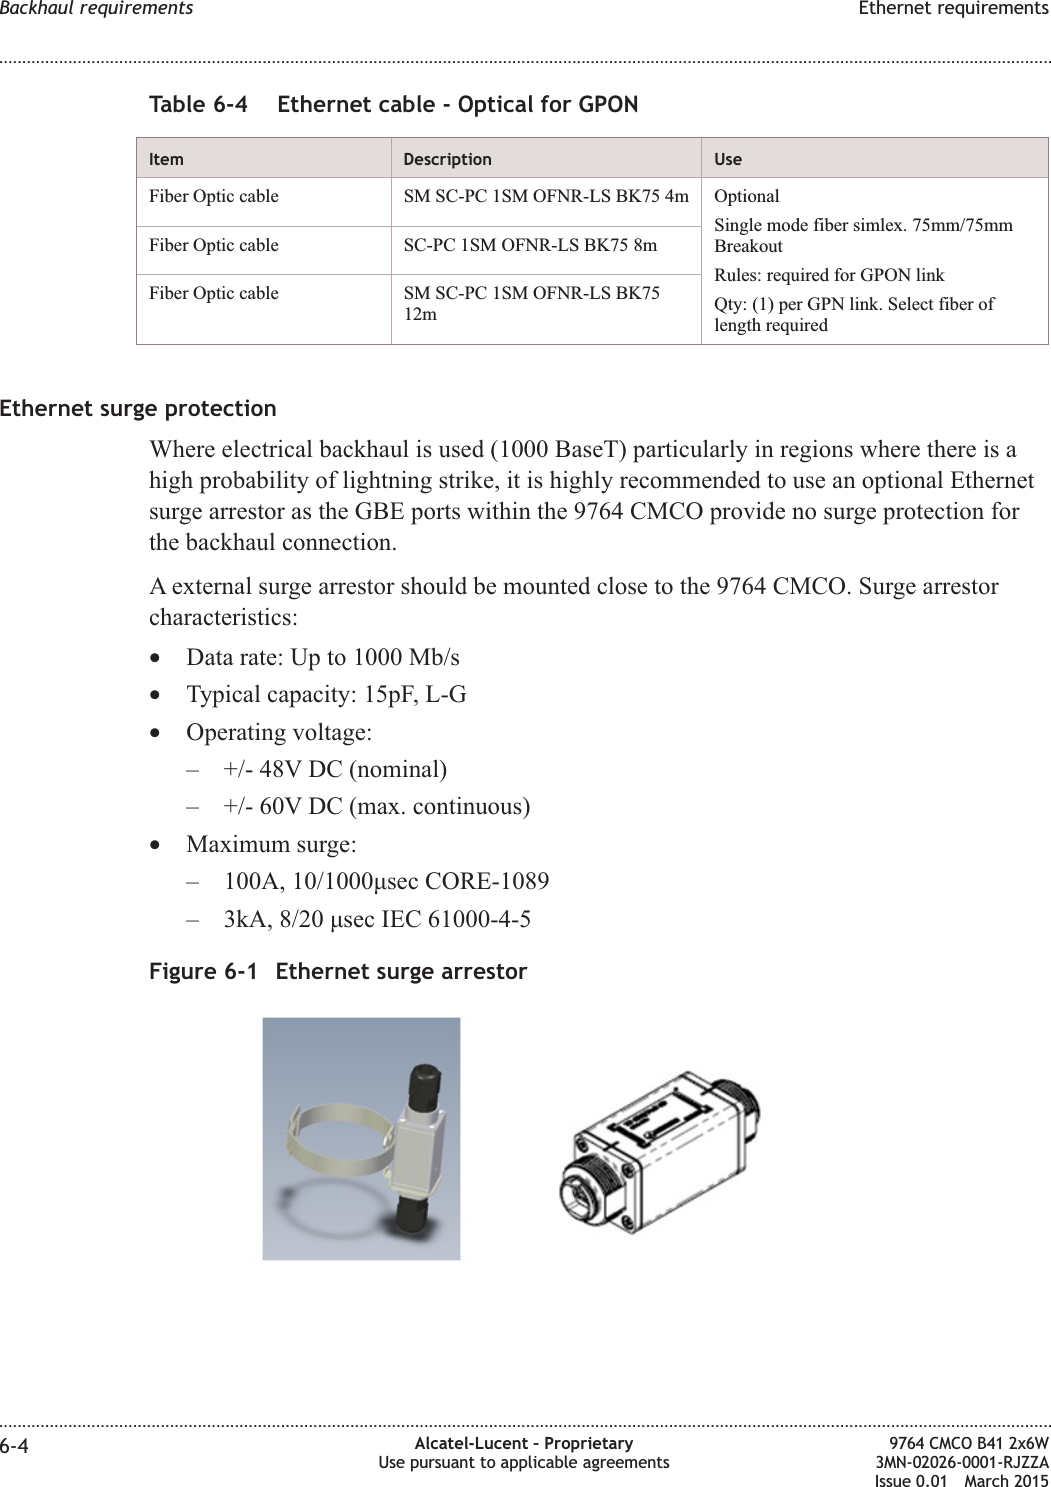 Table 6-4 Ethernet cable - Optical for GPONItem Description UseFiber Optic cable SM SC-PC 1SM OFNR-LS BK75 4m OptionalSingle mode fiber simlex. 75mm/75mmBreakoutRules: required for GPON linkQty: (1) per GPN link. Select fiber oflength requiredFiber Optic cable SC-PC 1SM OFNR-LS BK75 8mFiber Optic cable SM SC-PC 1SM OFNR-LS BK7512mEthernet surge protectionWhere electrical backhaul is used (1000 BaseT) particularly in regions where there is ahigh probability of lightning strike, it is highly recommended to use an optional Ethernetsurge arrestor as the GBE ports within the 9764 CMCO provide no surge protection forthe backhaul connection.A external surge arrestor should be mounted close to the 9764 CMCO. Surge arrestorcharacteristics:•Data rate: Up to 1000 Mb/s•Typical capacity: 15pF, L-G•Operating voltage:– +/- 48V DC (nominal)– +/- 60V DC (max. continuous)•Maximum surge:– 100A, 10/1000μsec CORE-1089– 3kA, 8/20 μsec IEC 61000-4-5Figure 6-1 Ethernet surge arrestorBackhaul requirements Ethernet requirements........................................................................................................................................................................................................................................................................................................................................................................................................................................................................6-4 Alcatel-Lucent – ProprietaryUse pursuant to applicable agreements9764 CMCO B41 2x6W3MN-02026-0001-RJZZAIssue 0.01 March 2015DRAFTDRAFT